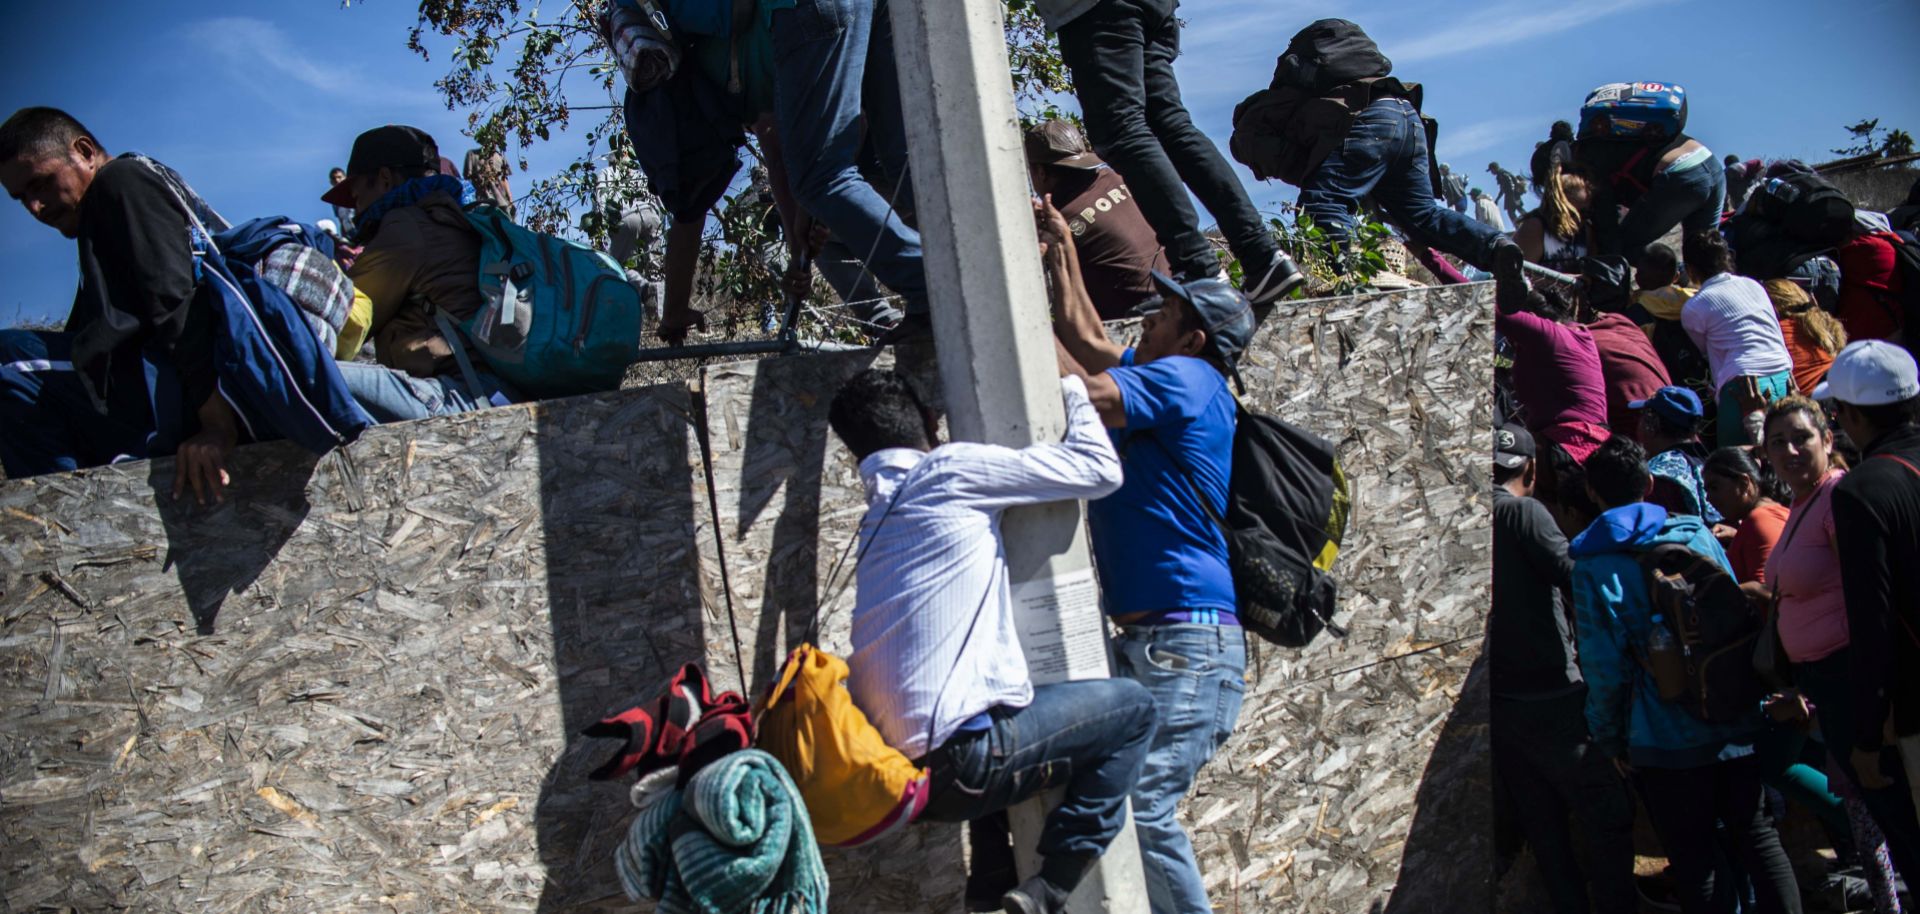 Central American migrants, mostly from Honduras, climb over a barrier as they try to reach the U.S.-Mexico border on Nov. 25, 2018, near the El Chaparral border crossing in Tijuana, Baja California State, Mexico.